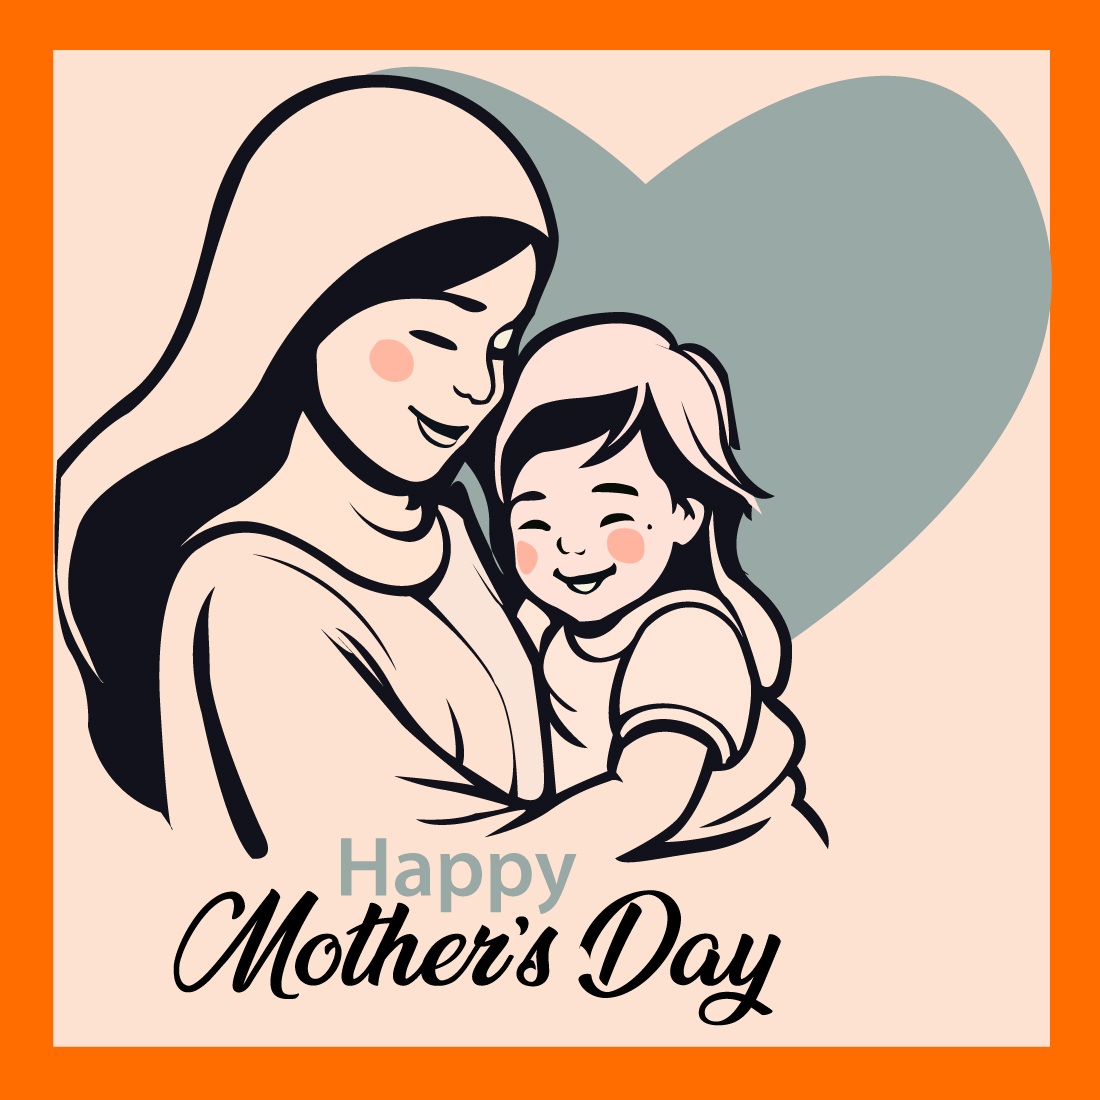 Mother's Day template Design, Mother taking care of his child cover image.